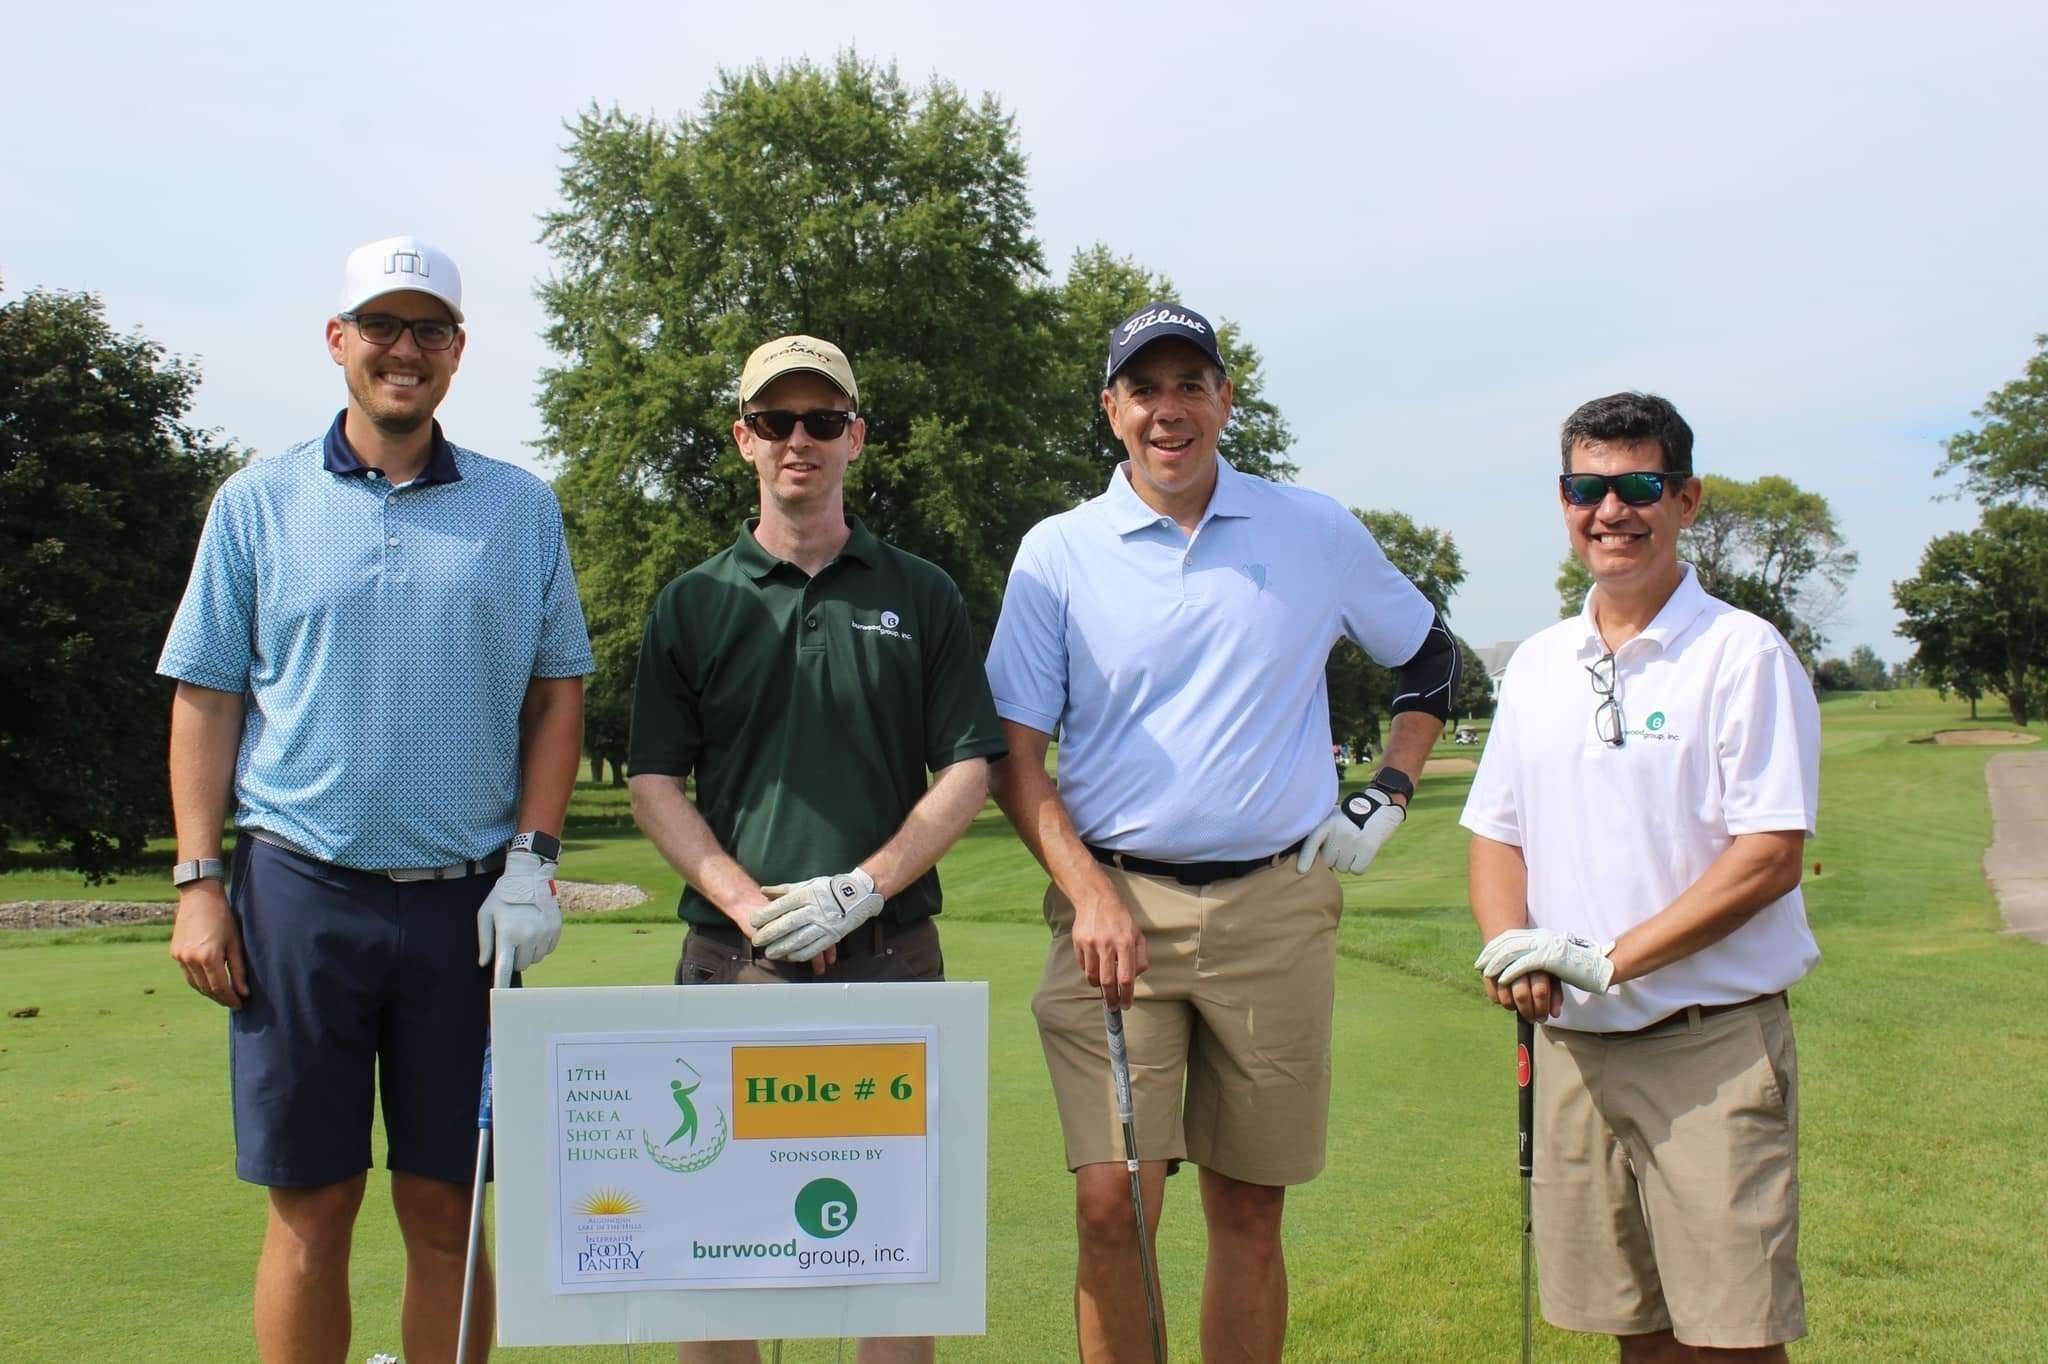 17th Annual Take a Shot at Hunger Golf Event 2022